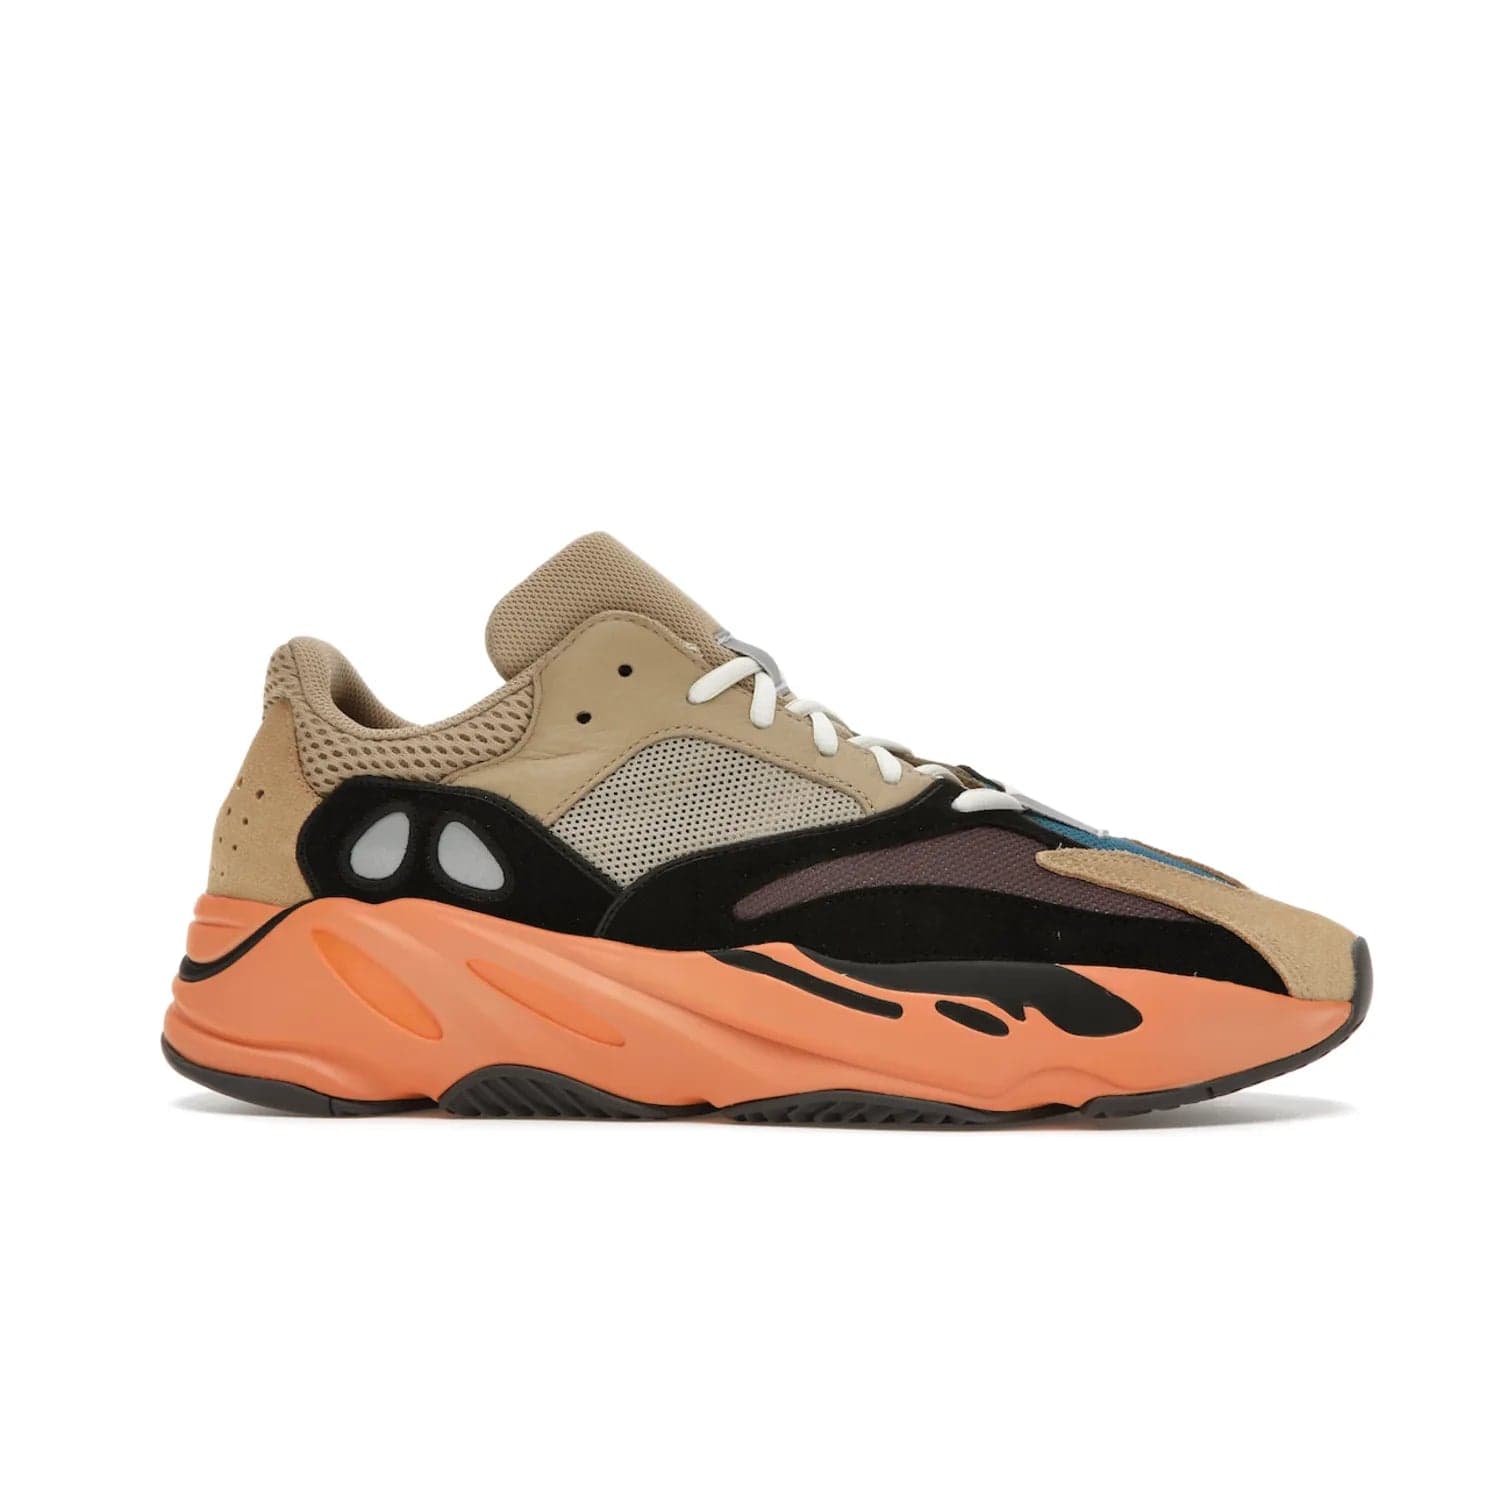 adidas Yeezy Boost 700 Enflame Amber - Image 2 - Only at www.BallersClubKickz.com - Adidas Yeezy Boost 700 Enflame Amber: Eye-catching design with pale yellow, brown, teal, and orange! Get yours in June 2021.